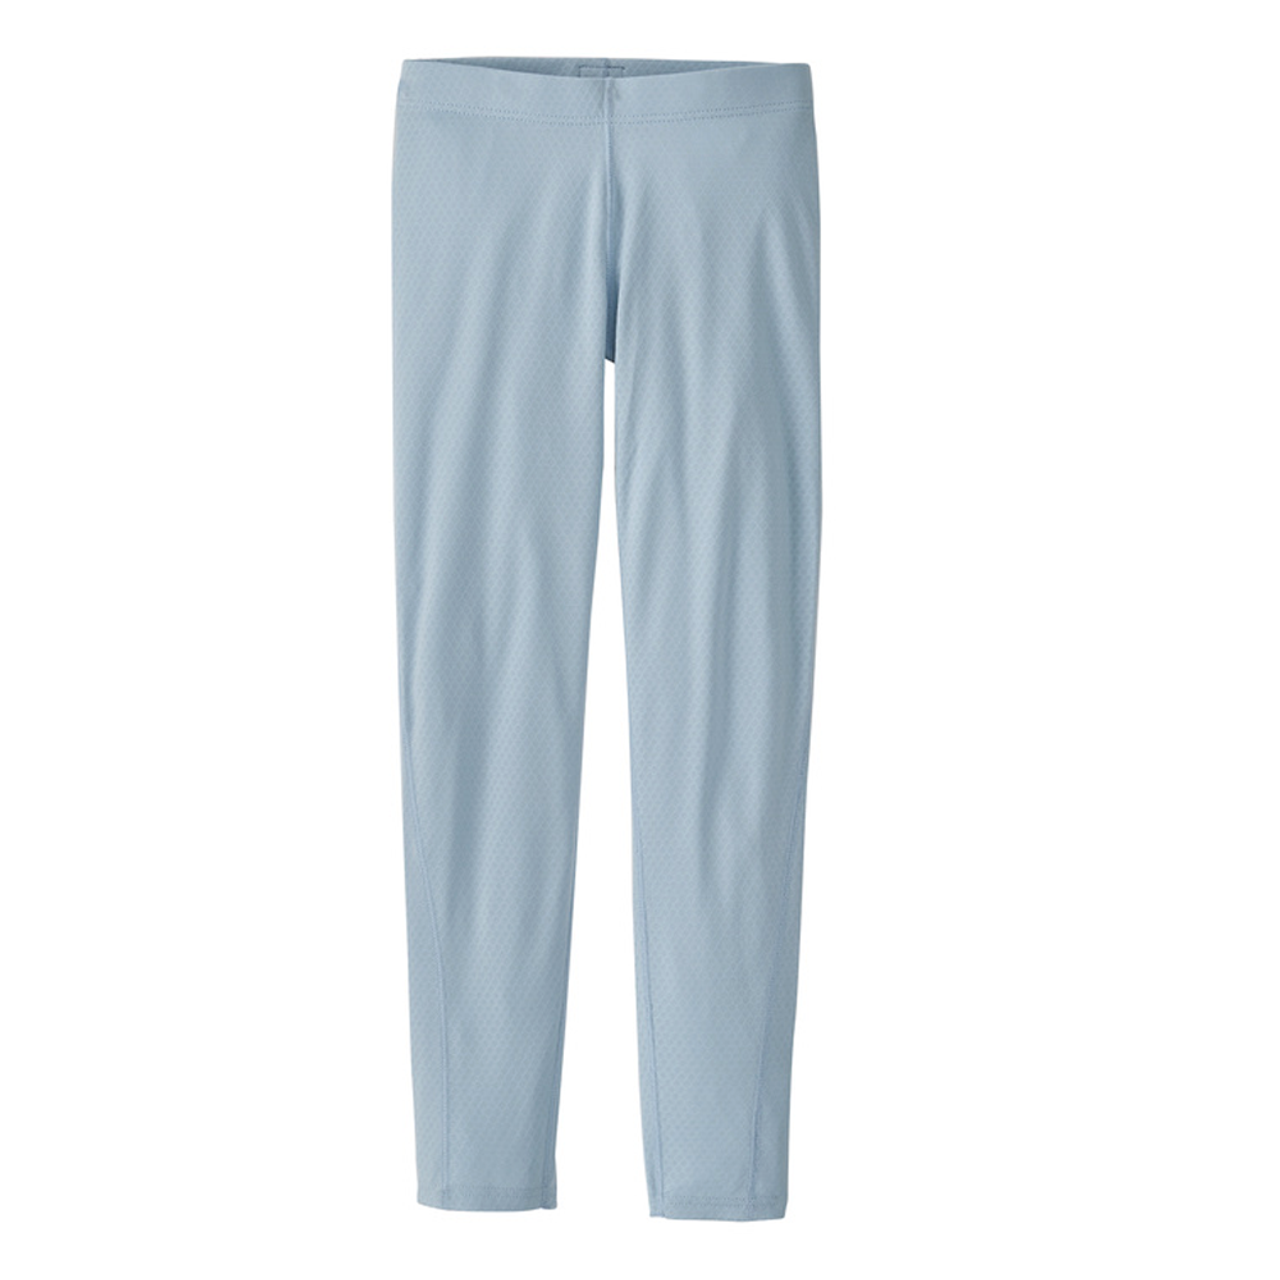 Patagonia Capilene Midweight Bottoms - Women's Review